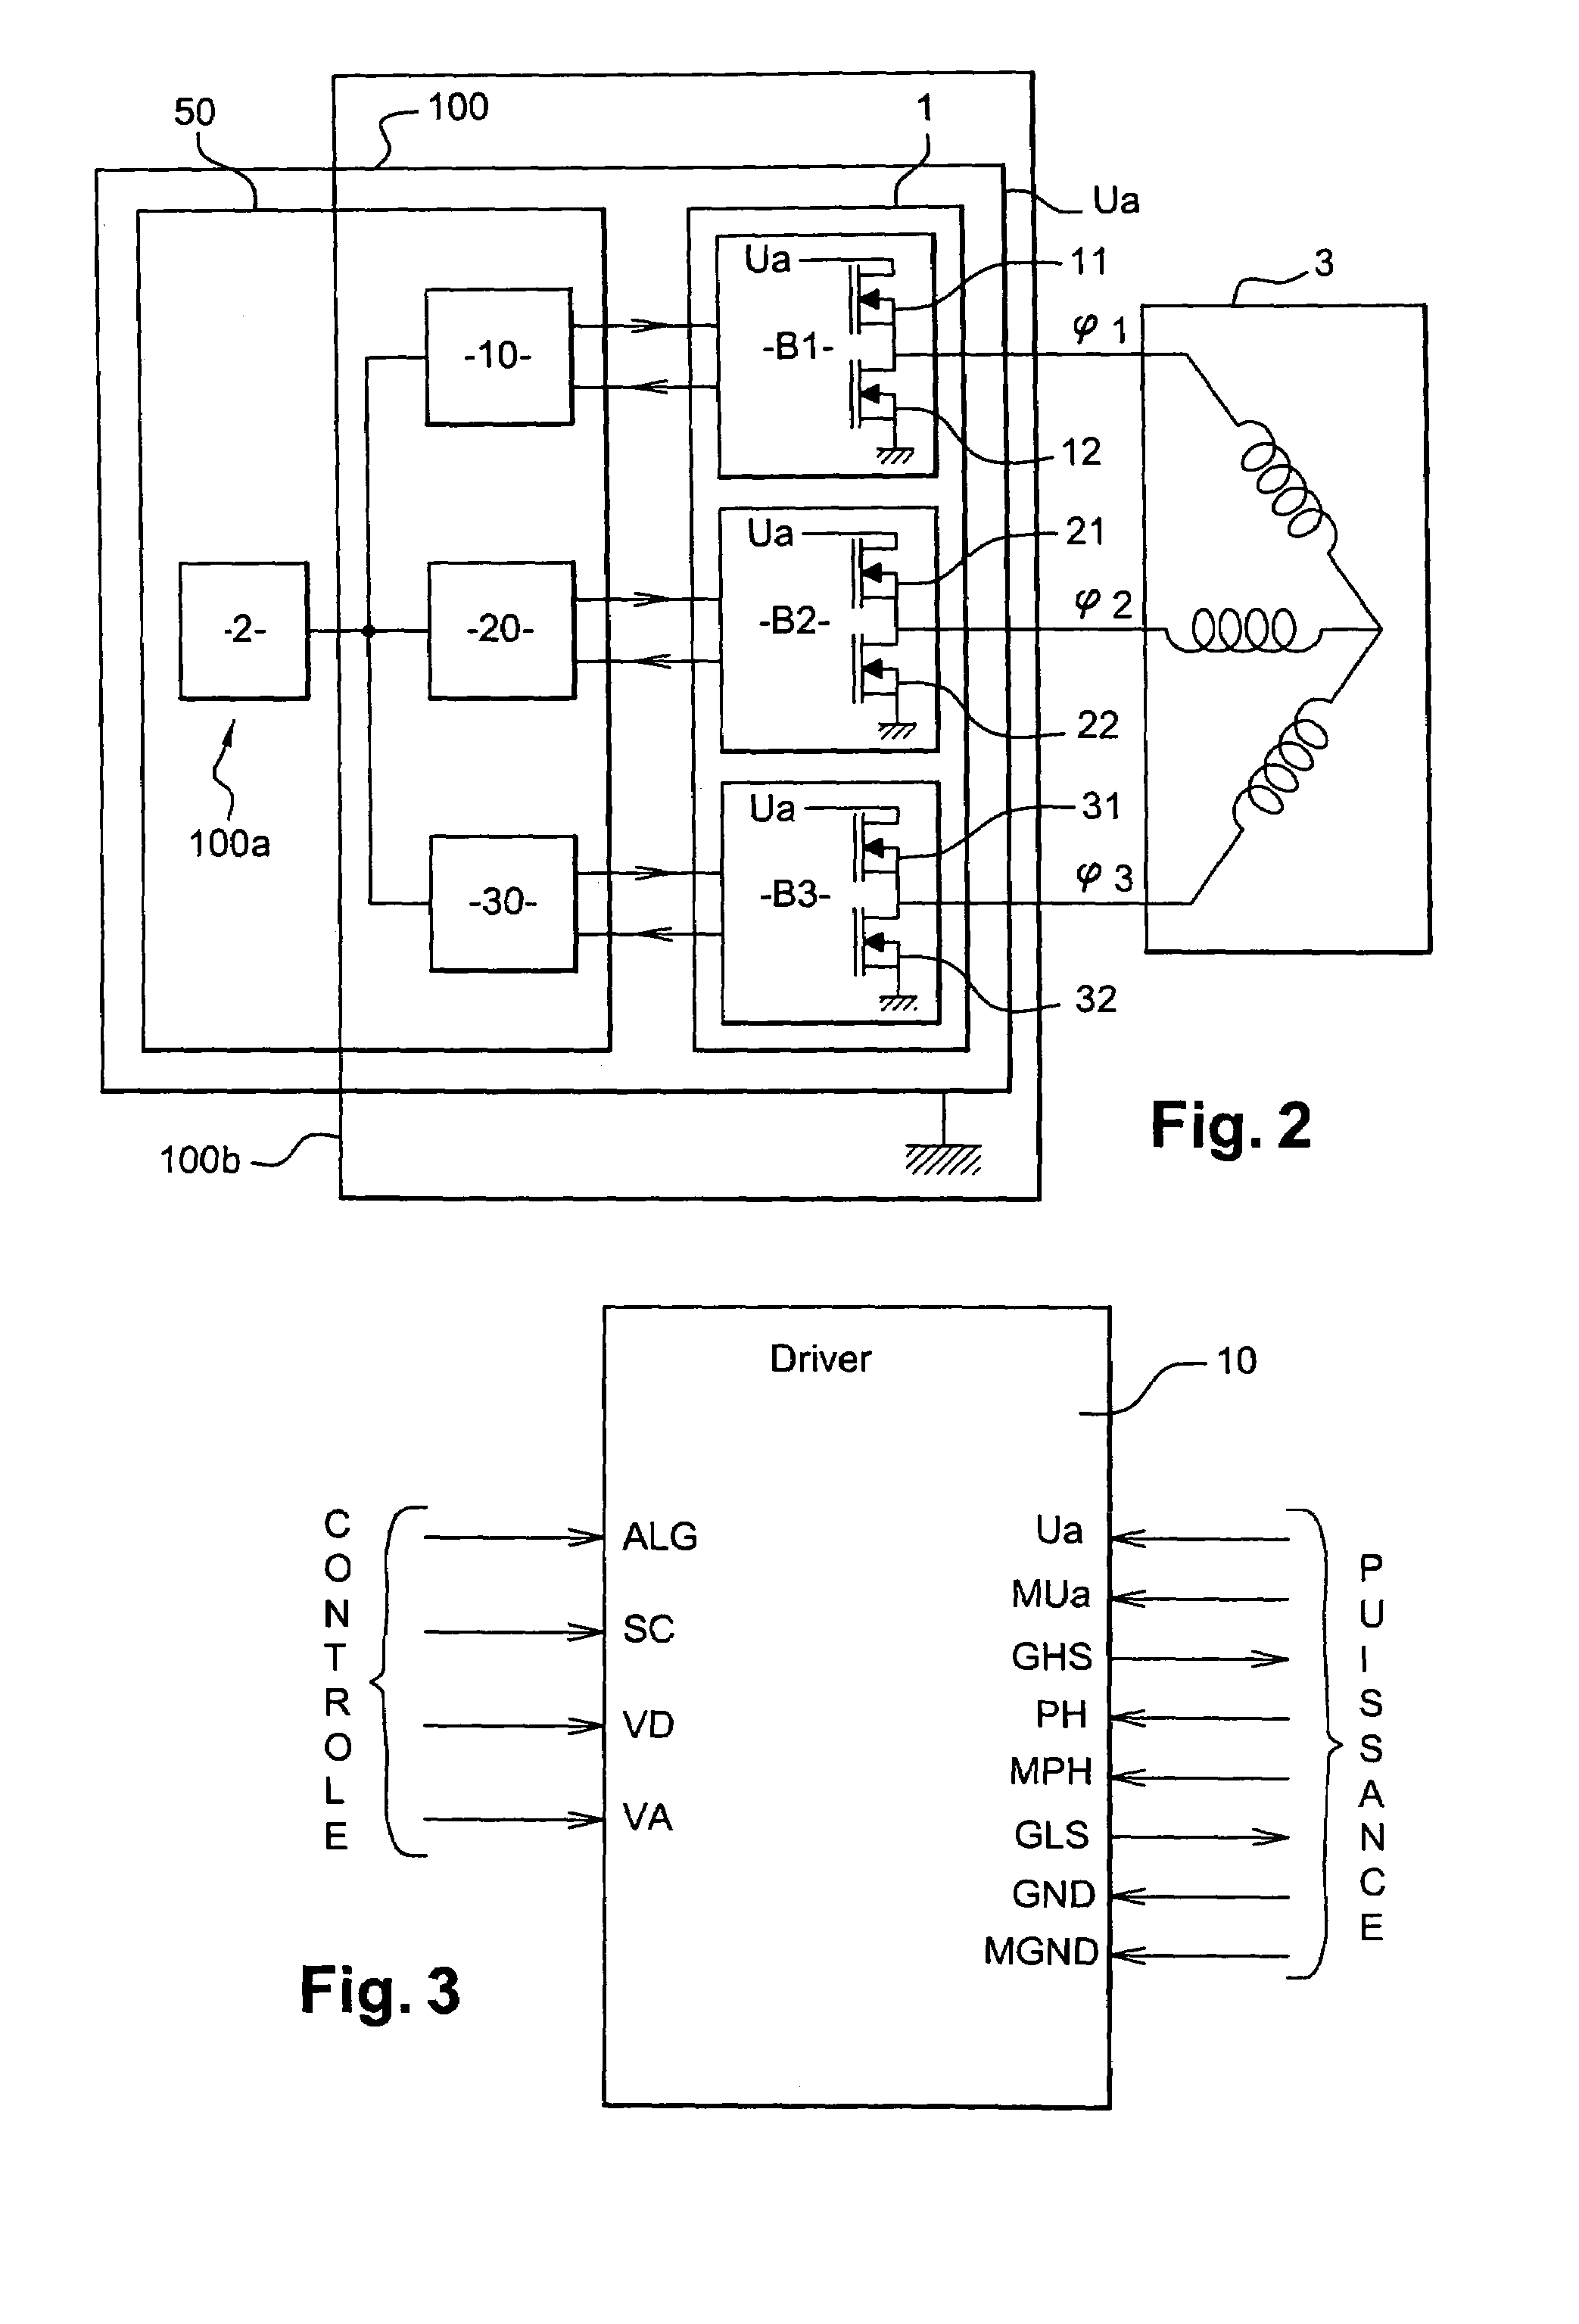 Control and power module for integrated alternator-starter